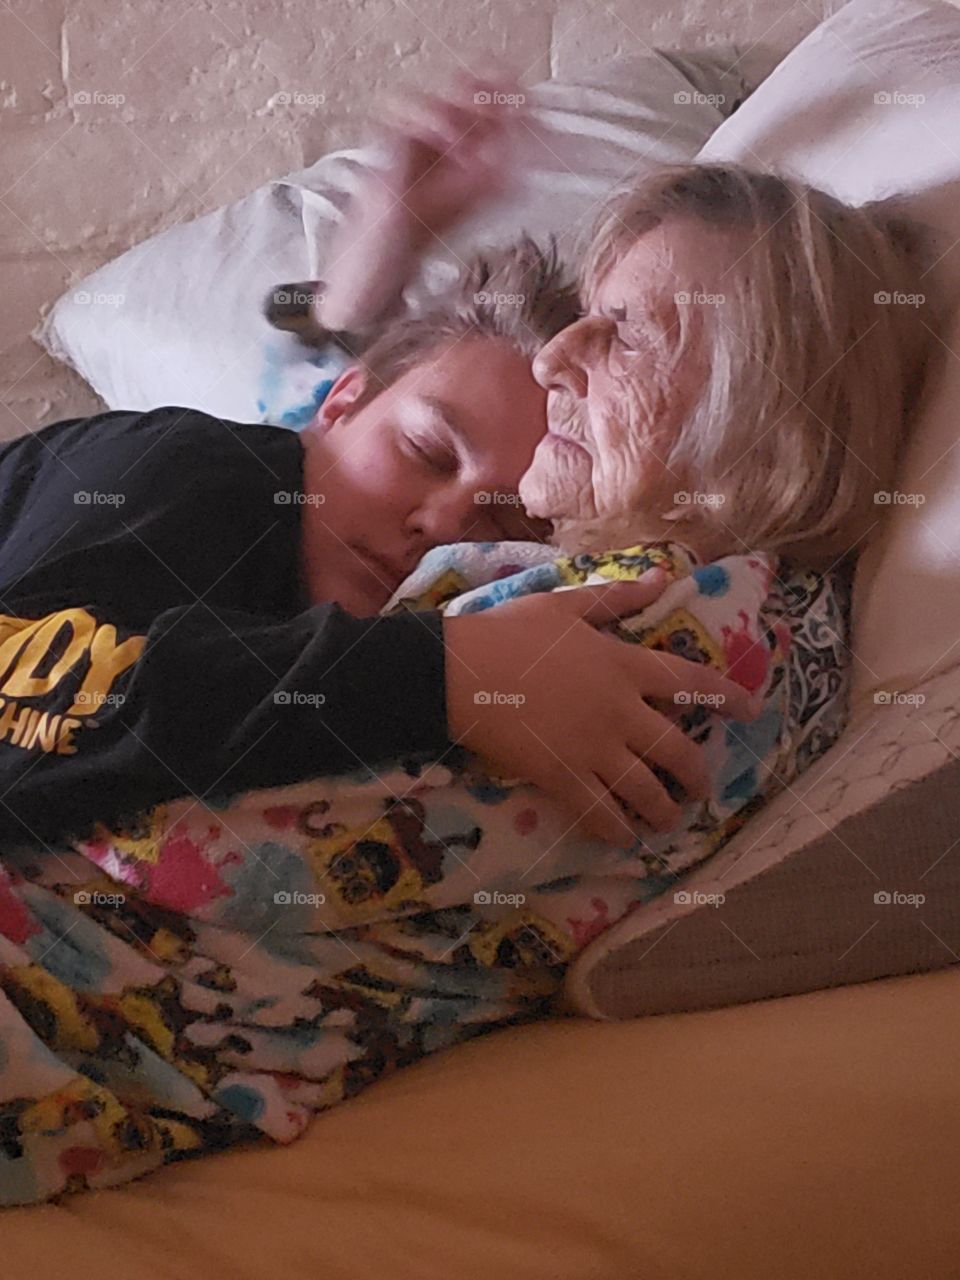 grandma and grandson laying arm and arm. 88 years young and a 15 years young. Love during this holiday season with a great gift of my mom visiting our new home. This the season..